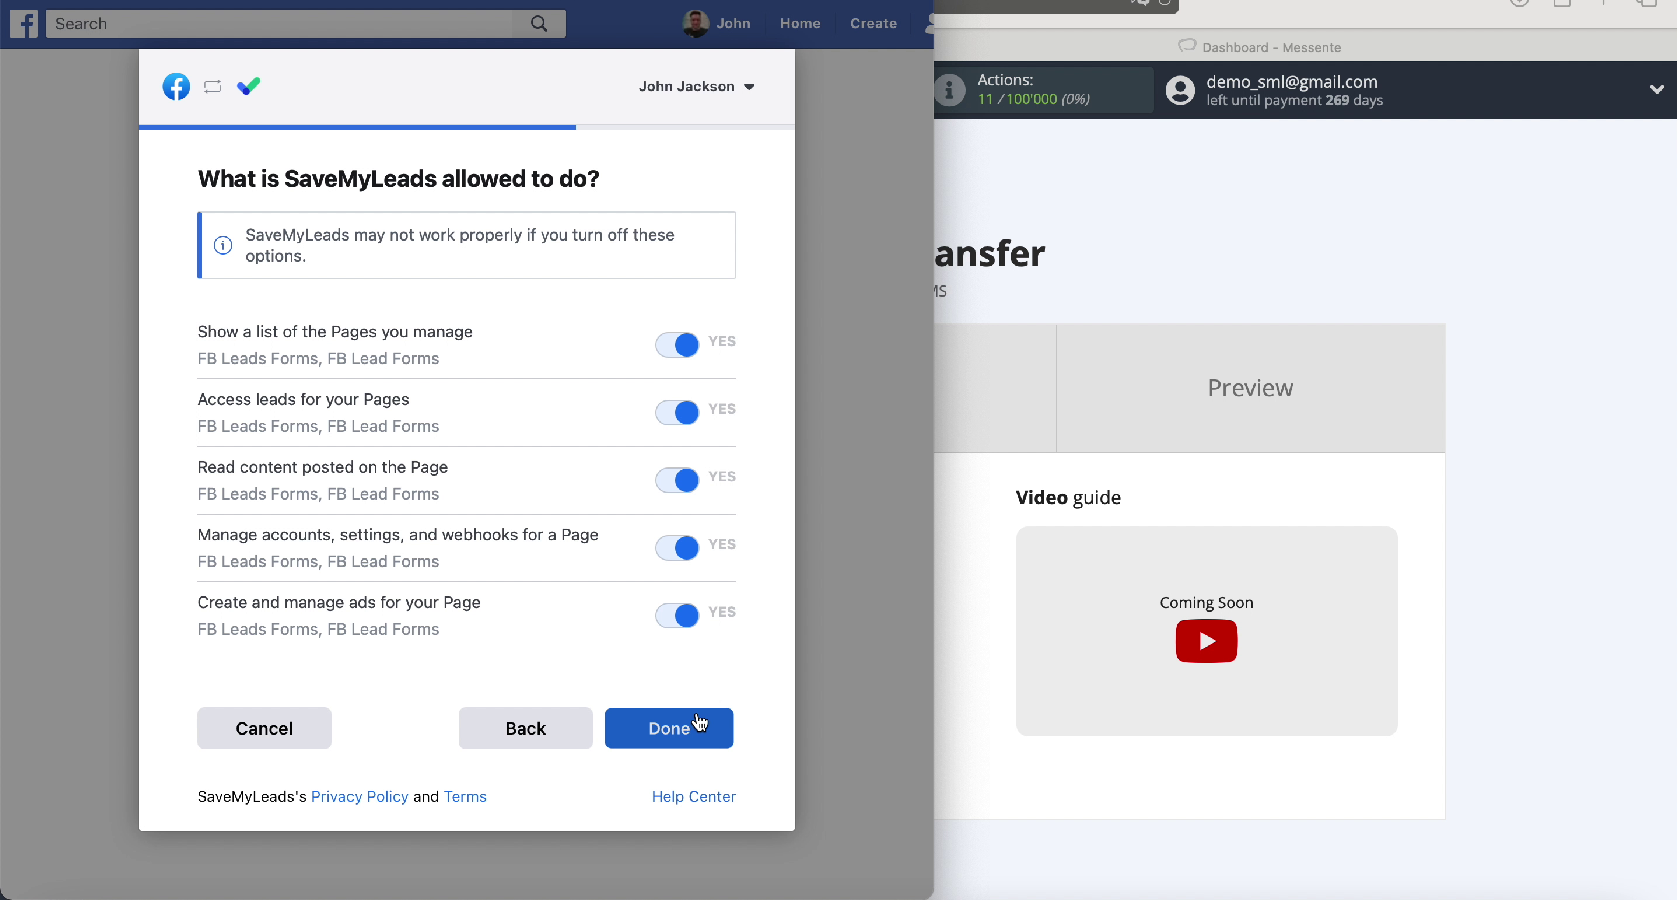 How to set up Facebook and Messente integration | Grant access and continue settings